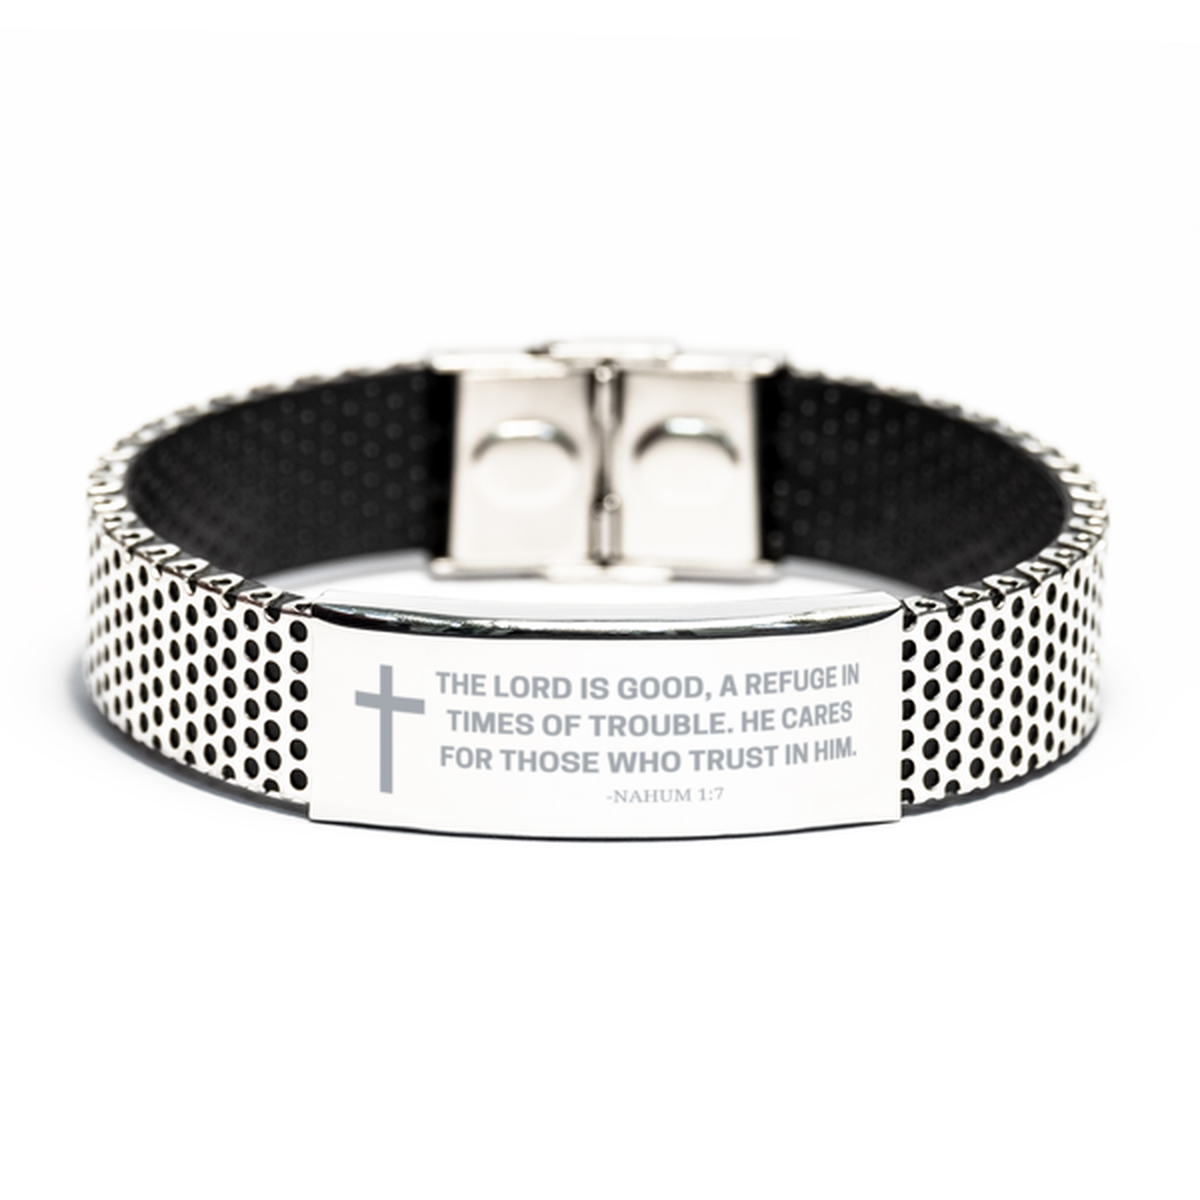 Baptism Gifts For Teenage Boys Girls, Christian Bible Verse Stainless Steel Bracelet, The Lord is good, Catholic Confirmation Gifts for Son, Godson, Grandson, Nephew